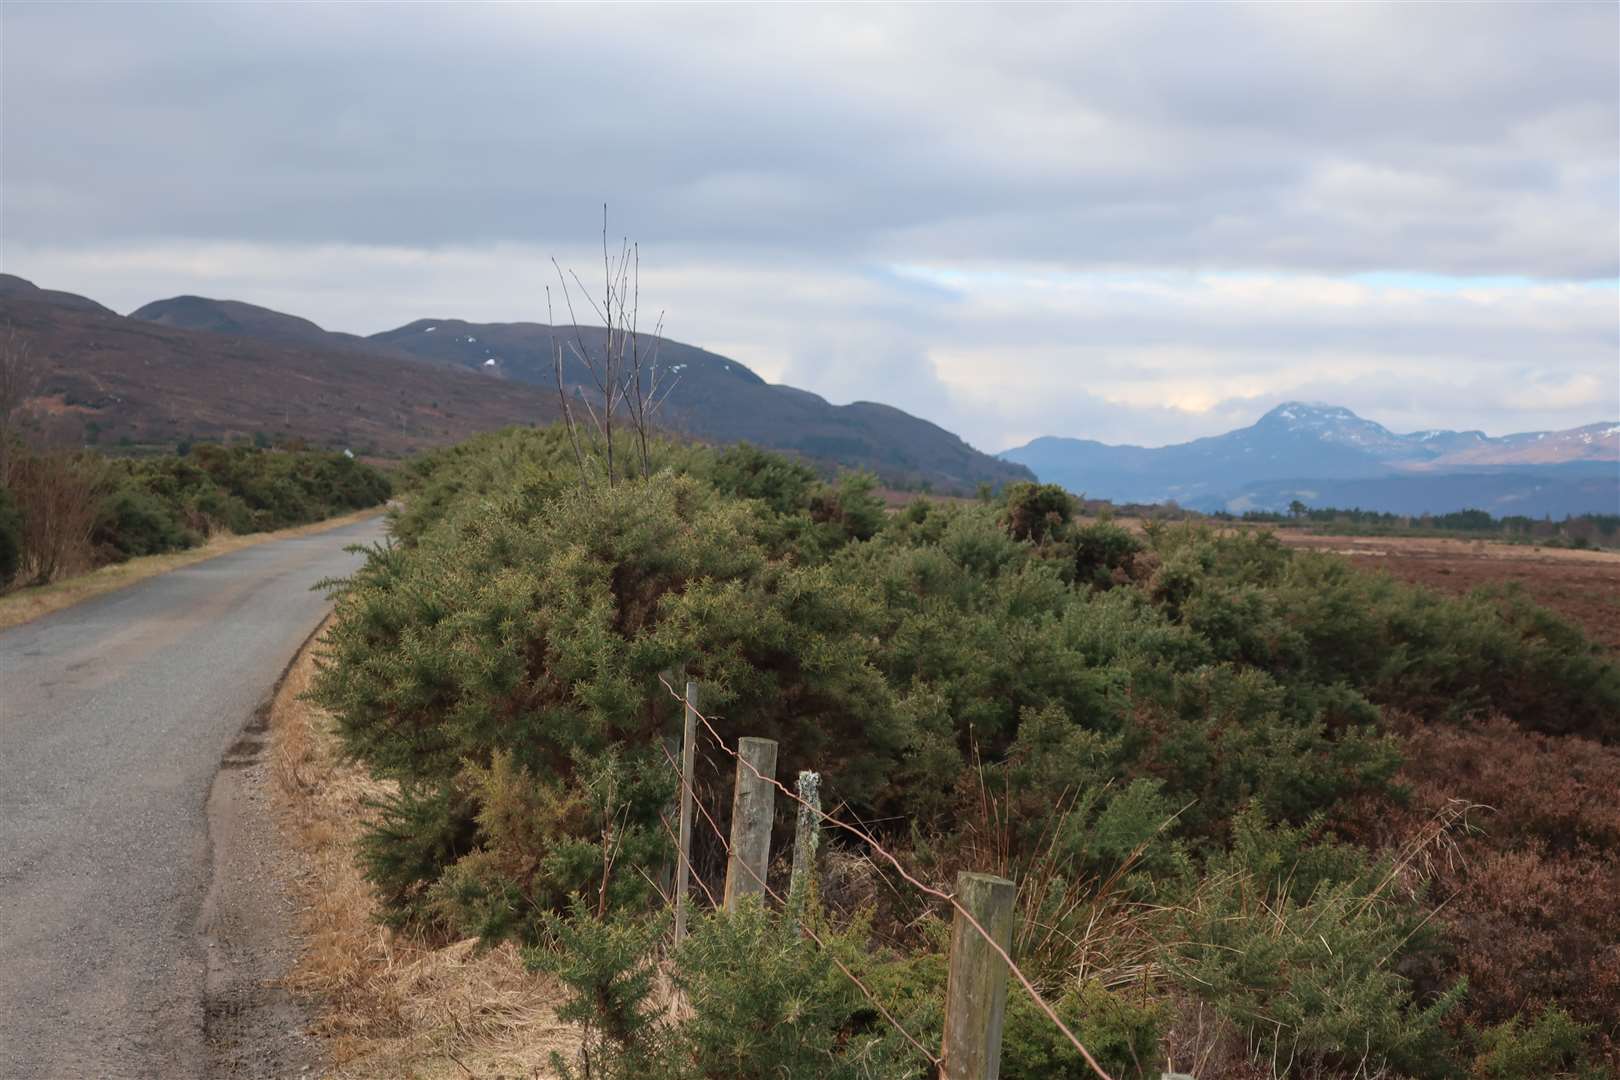 On the road over the Ashie Moor, with Meall Fuar-mhonaidh visible in the distance.